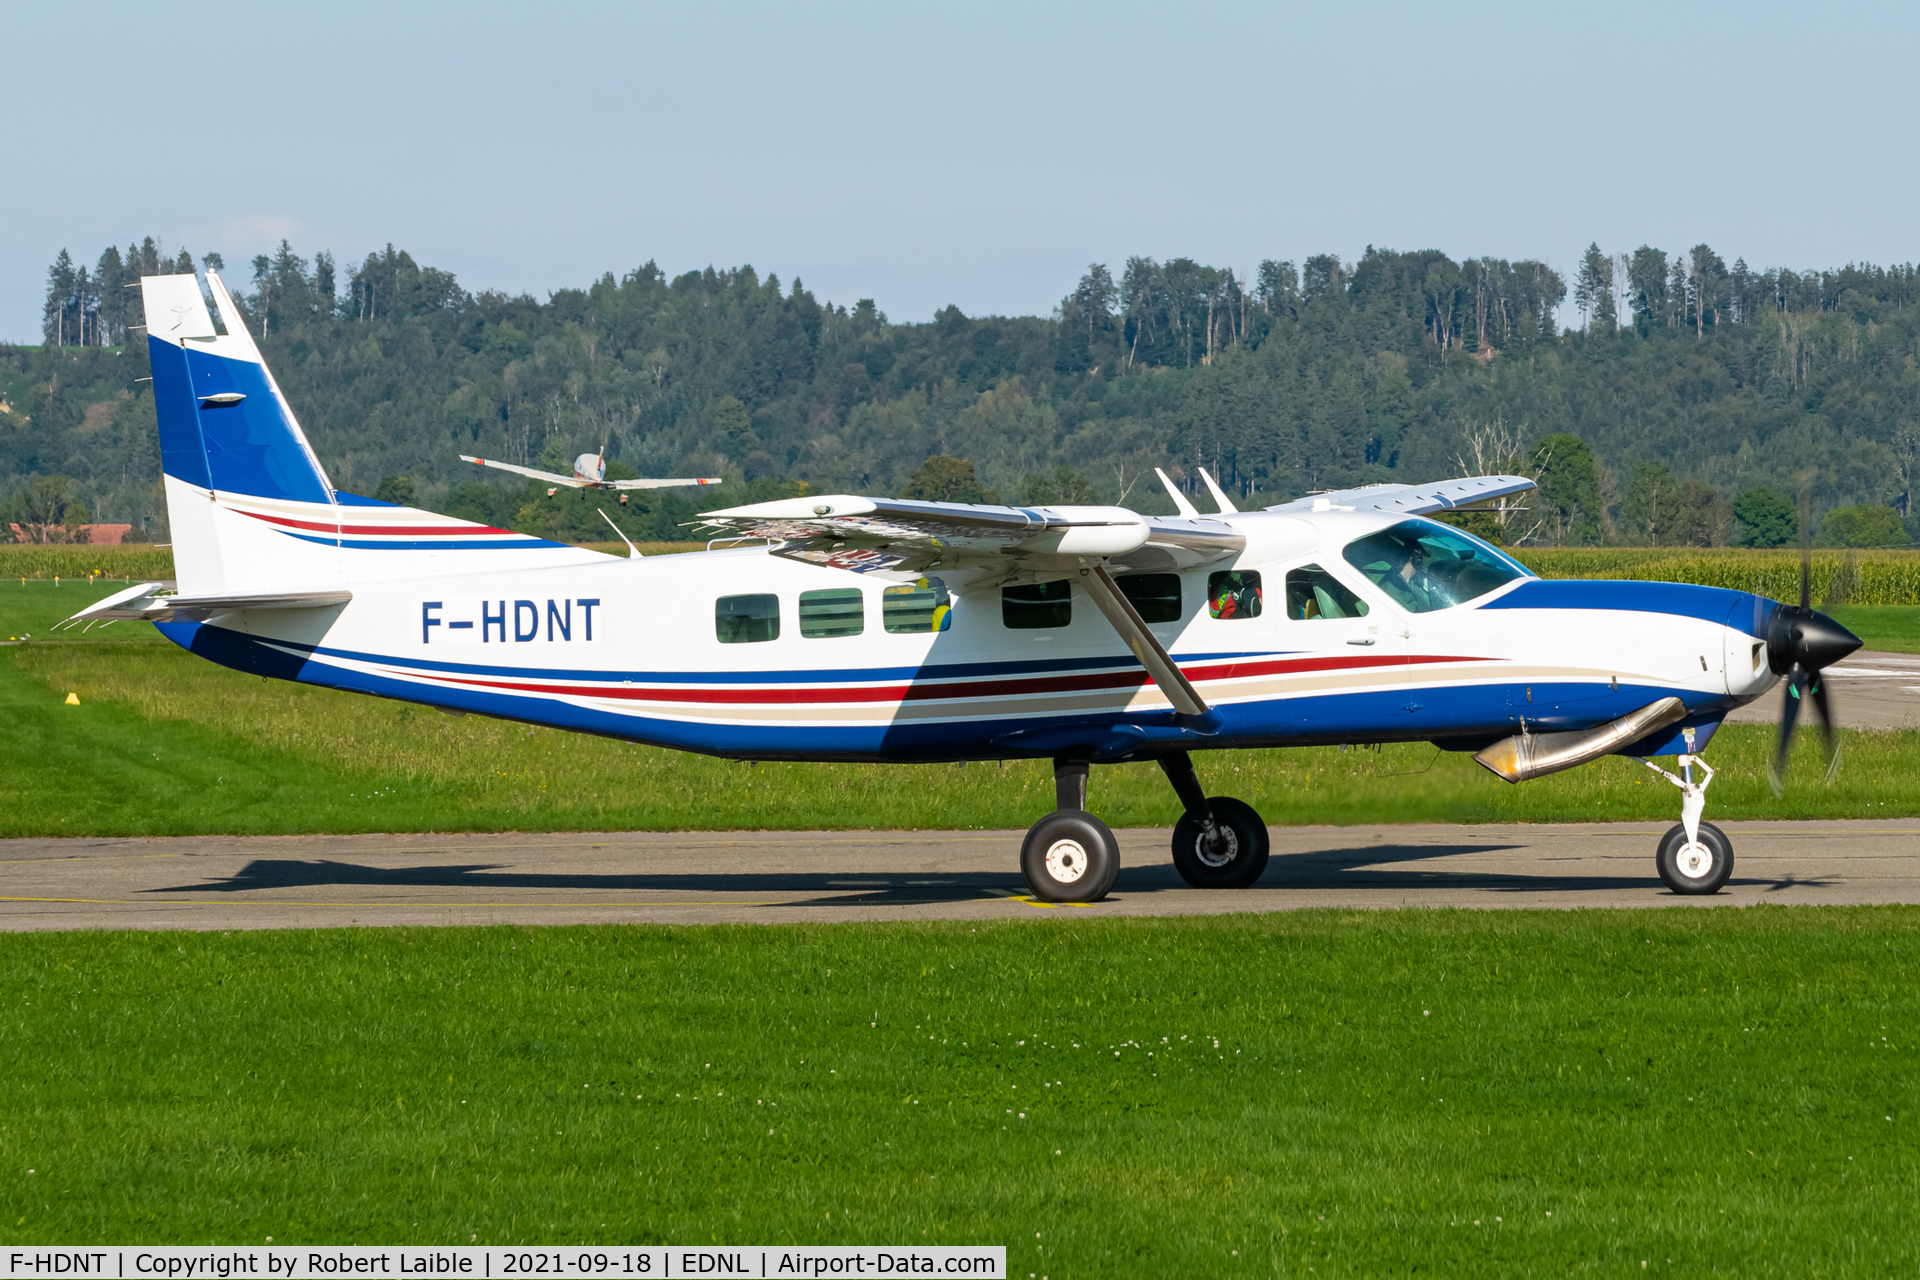 F-HDNT, 2008 Cessna 208B Grand Caravan C/N 208B-2060, This Plane flew for Skydive Nuggets that weekend, because their plane D-FALB was still on maintenance.